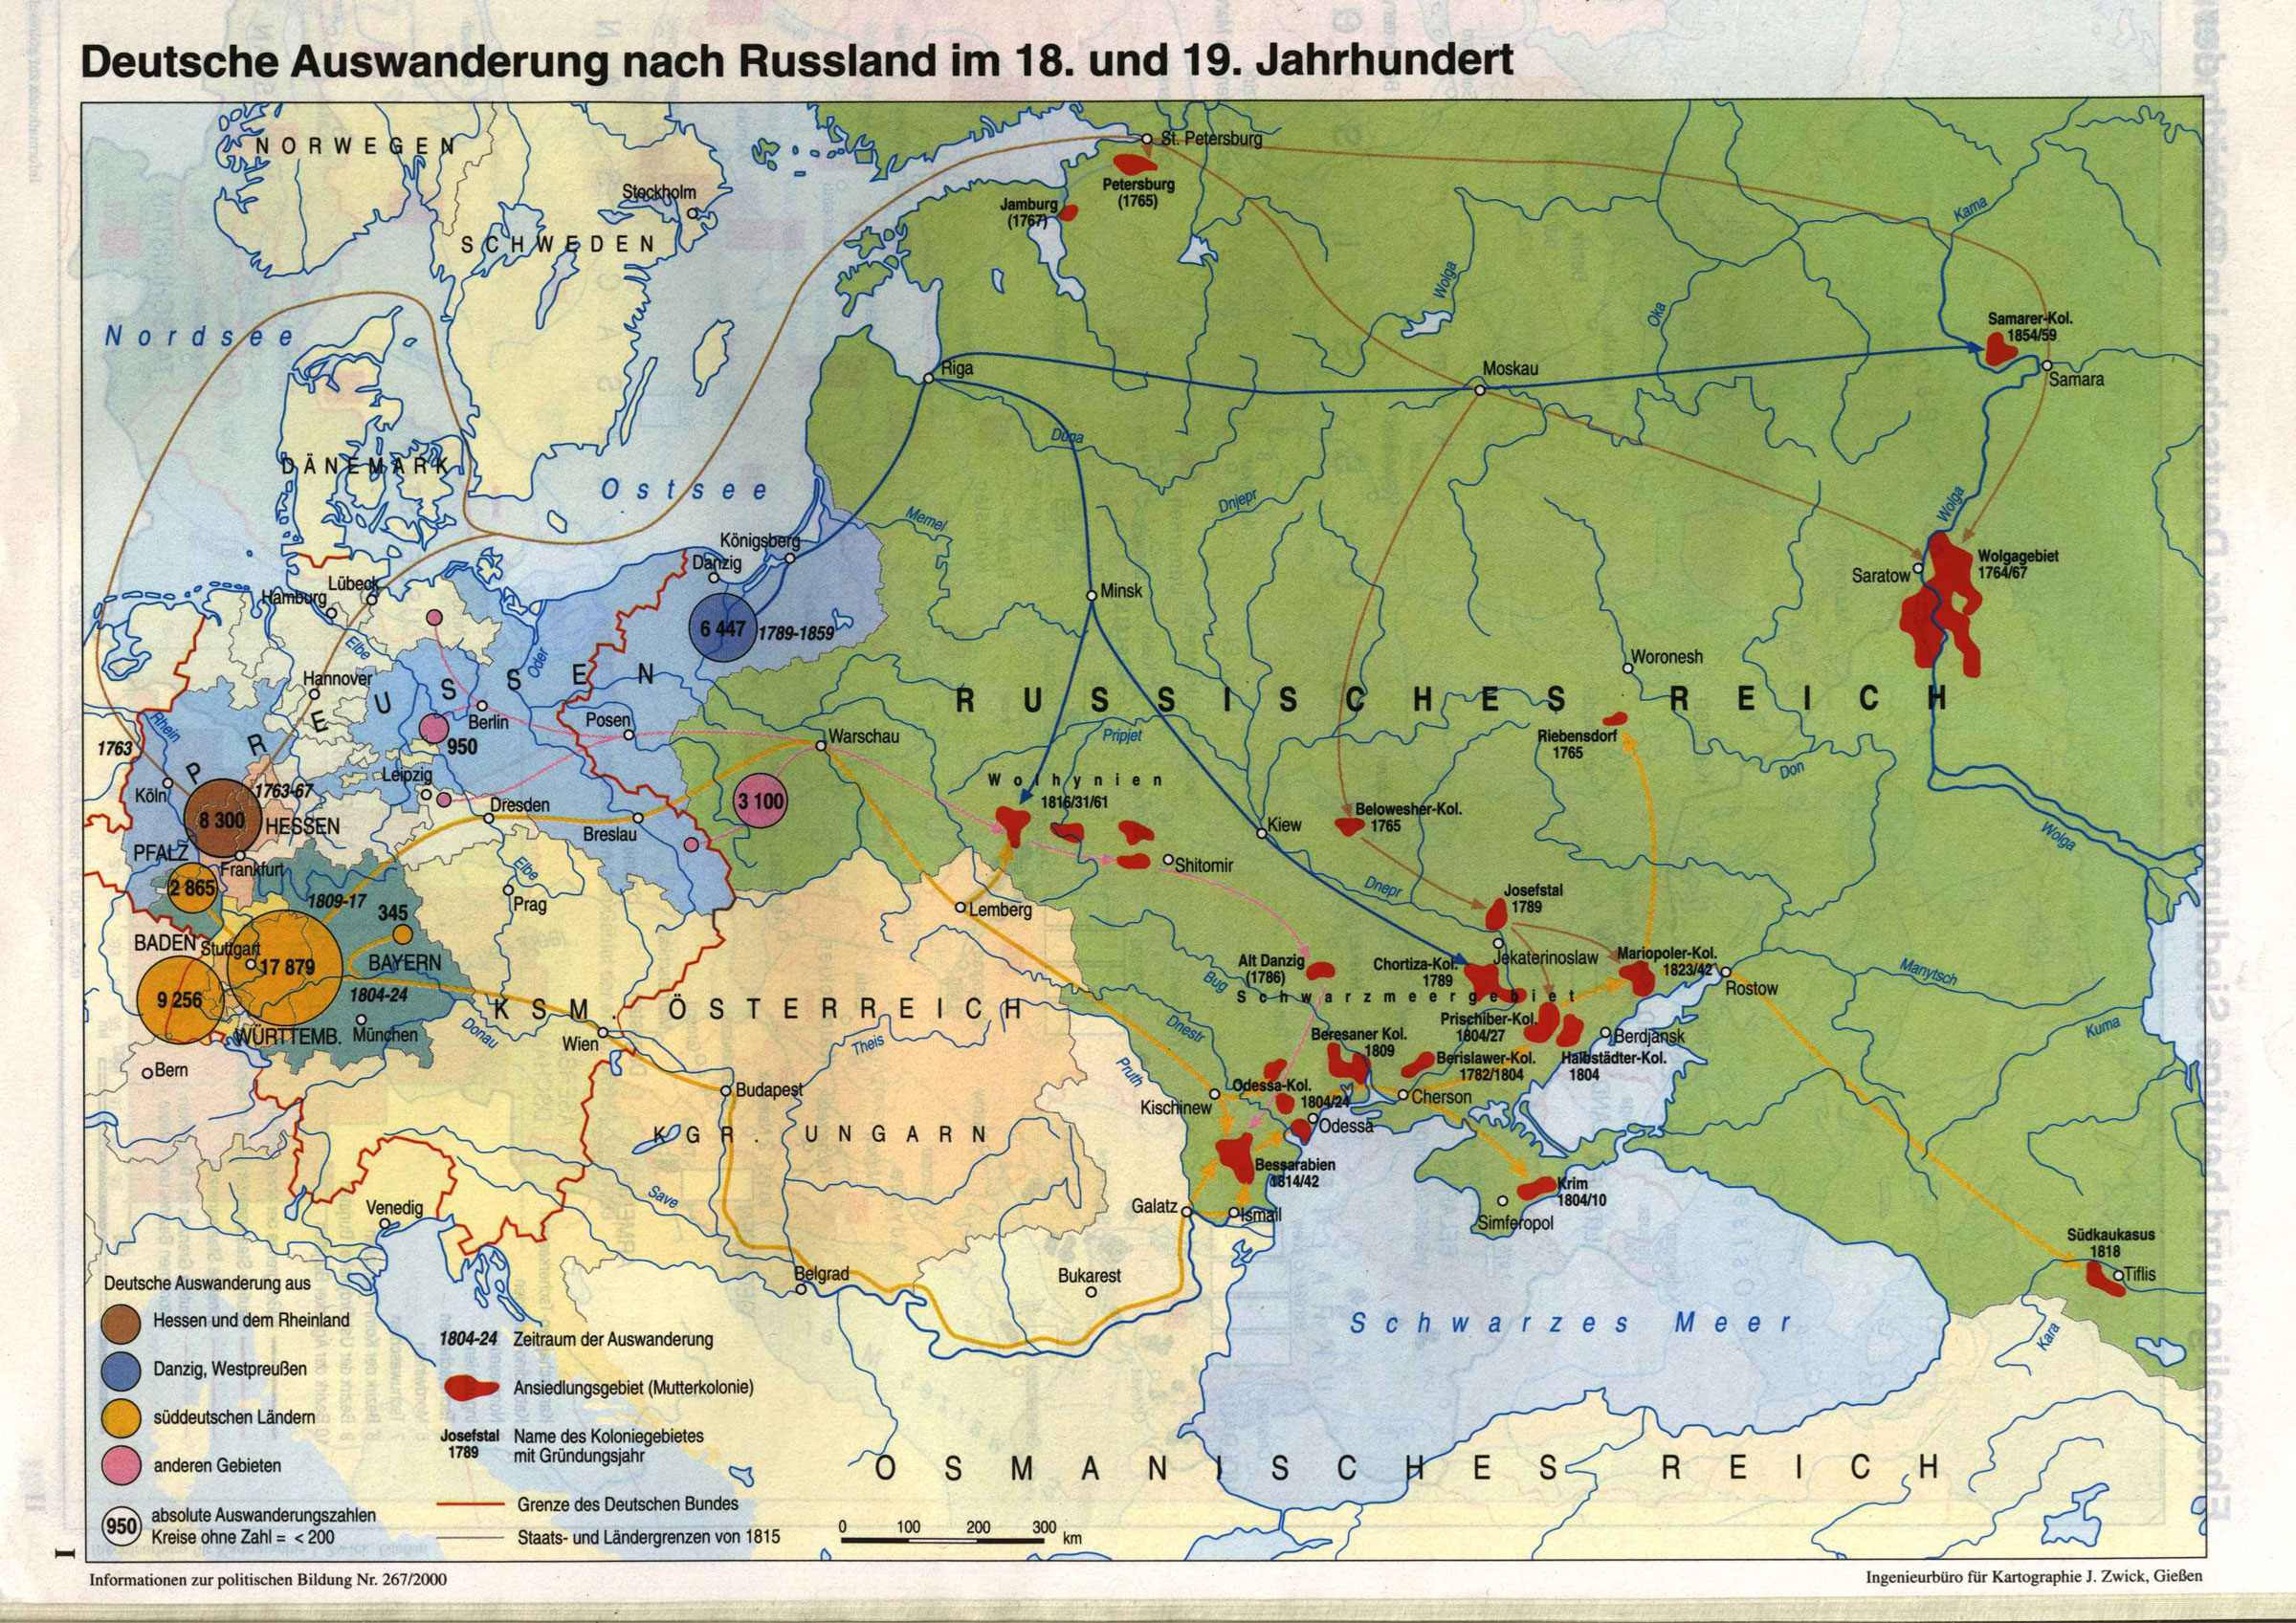 German migration to Russia in the 18th and 19th Century.